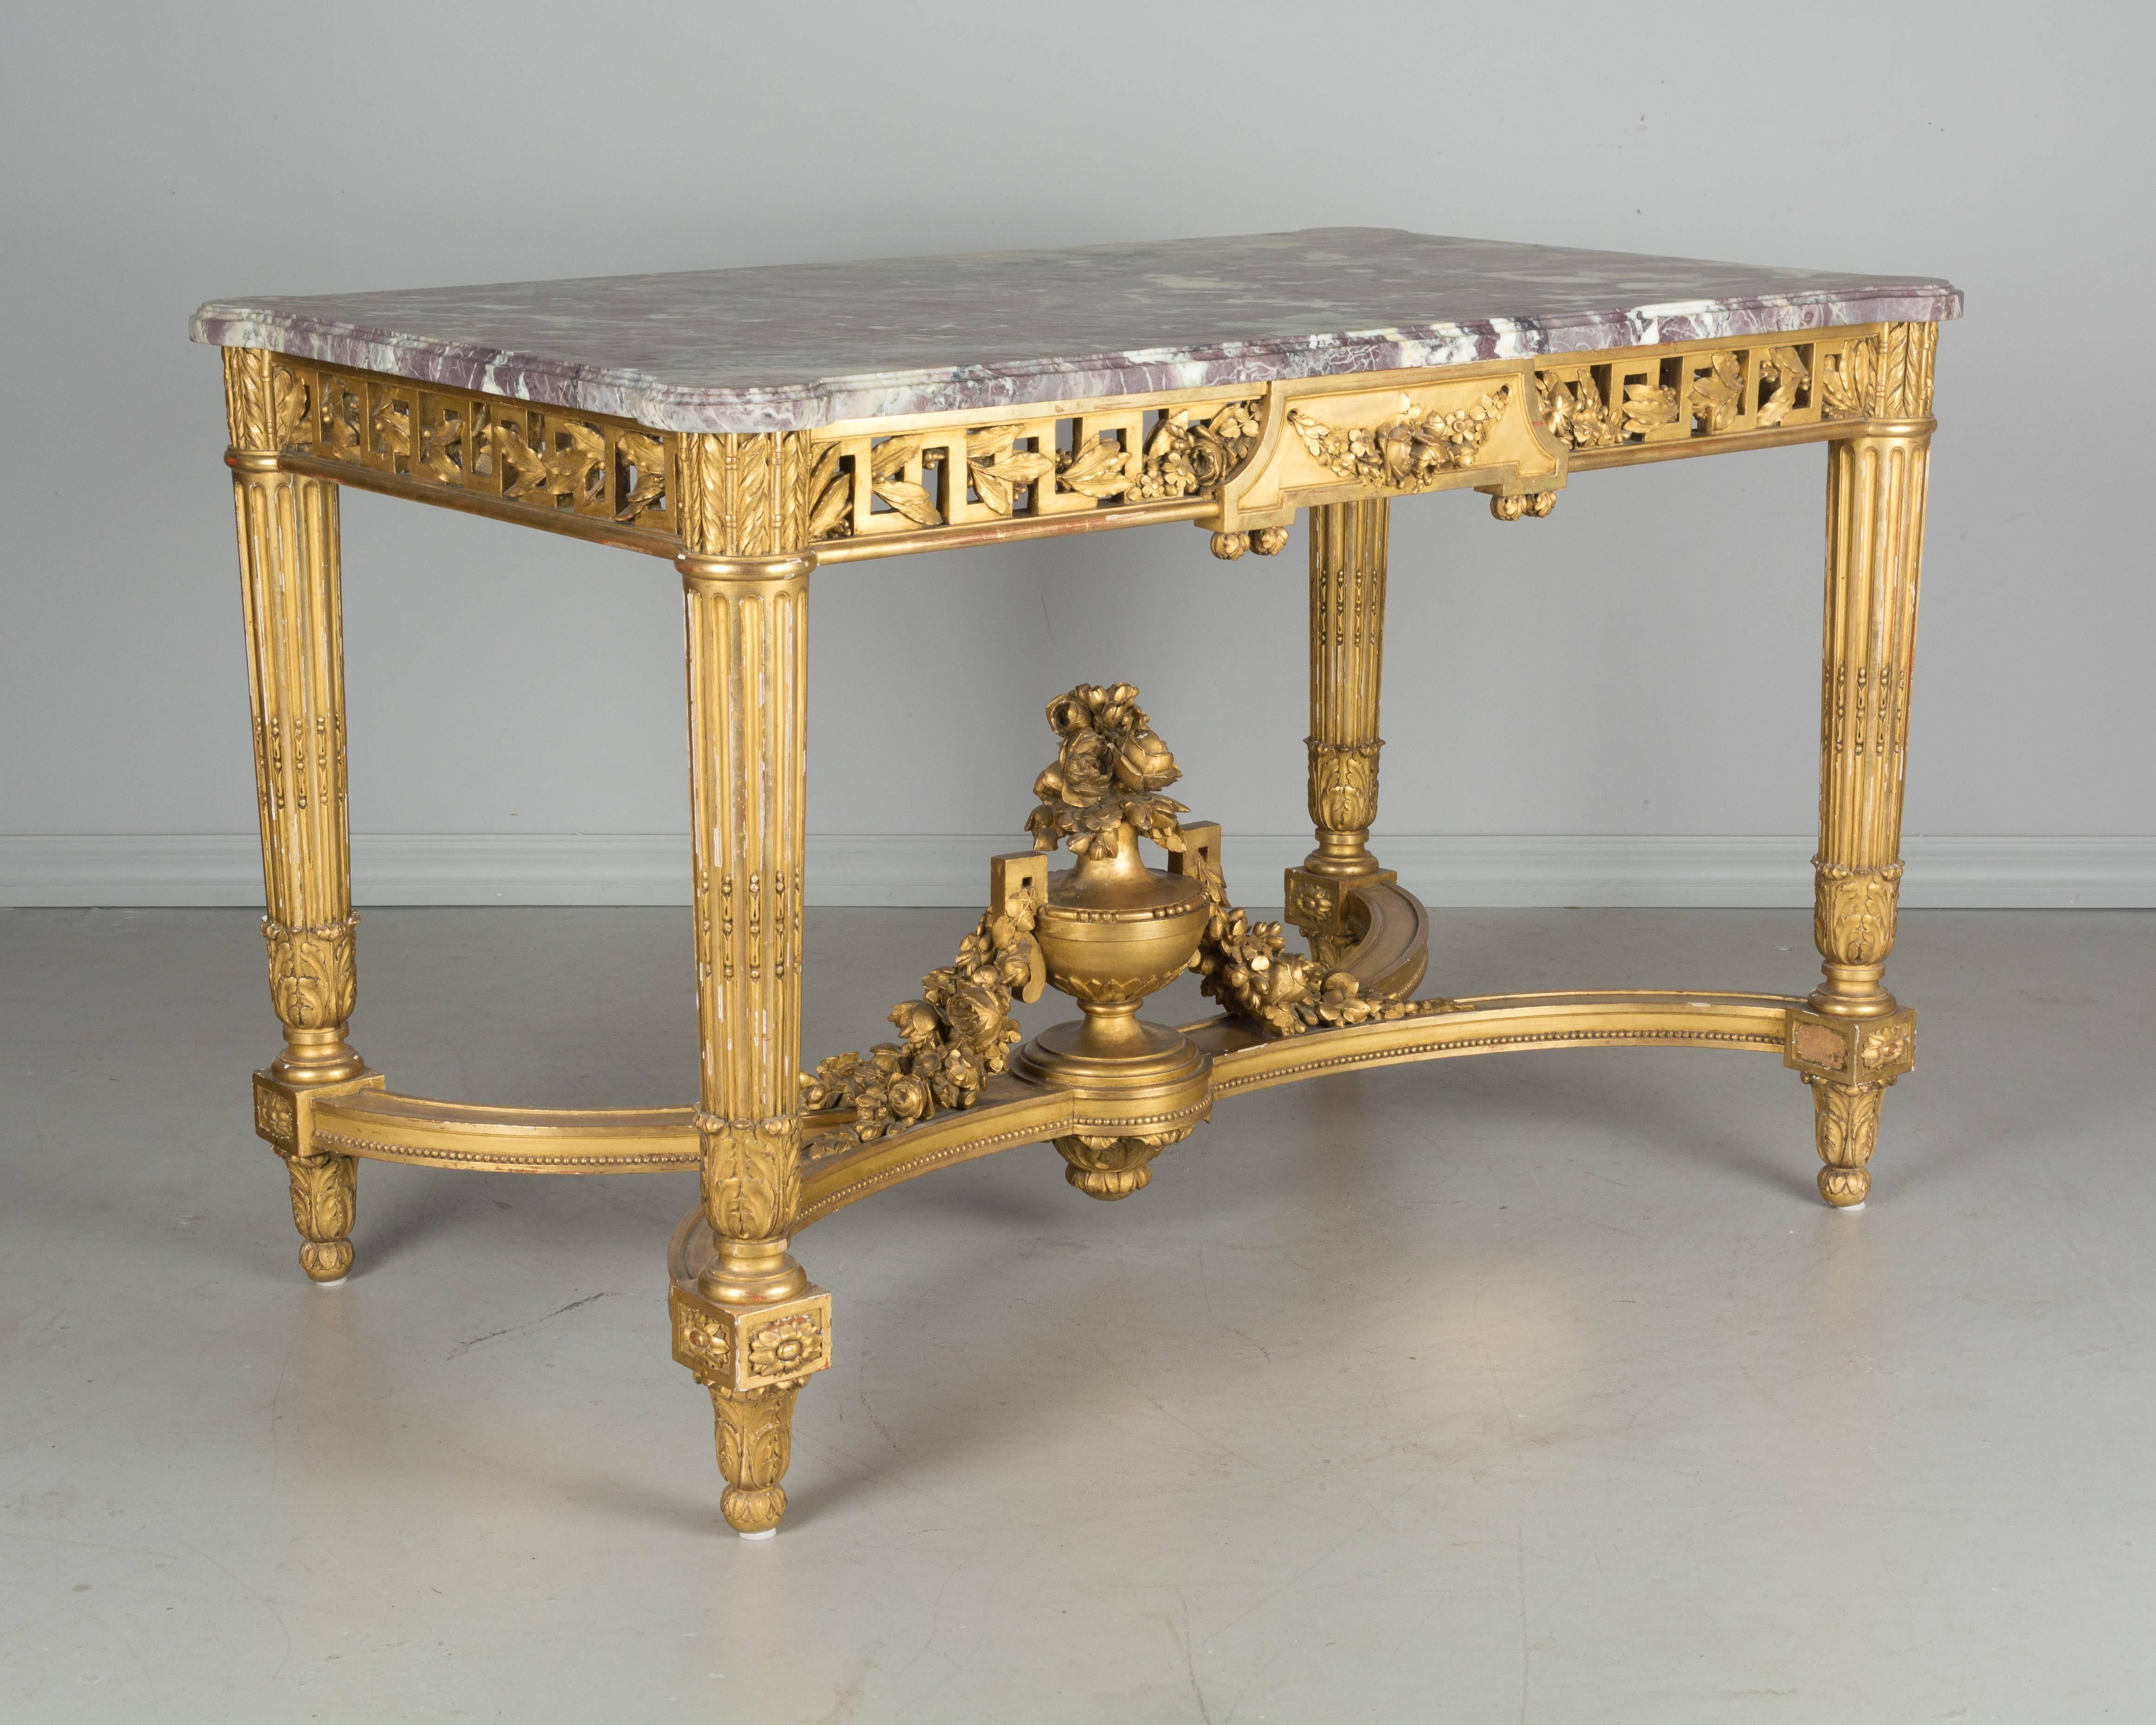 19th century Louis XVI style marble top, gilt decorated center table. Fluted legs with center stretcher. Sculptural flower urn with floral garlands. Original marble top with beautiful lavender and grey coloring, shaped corners and grooved edge. Some